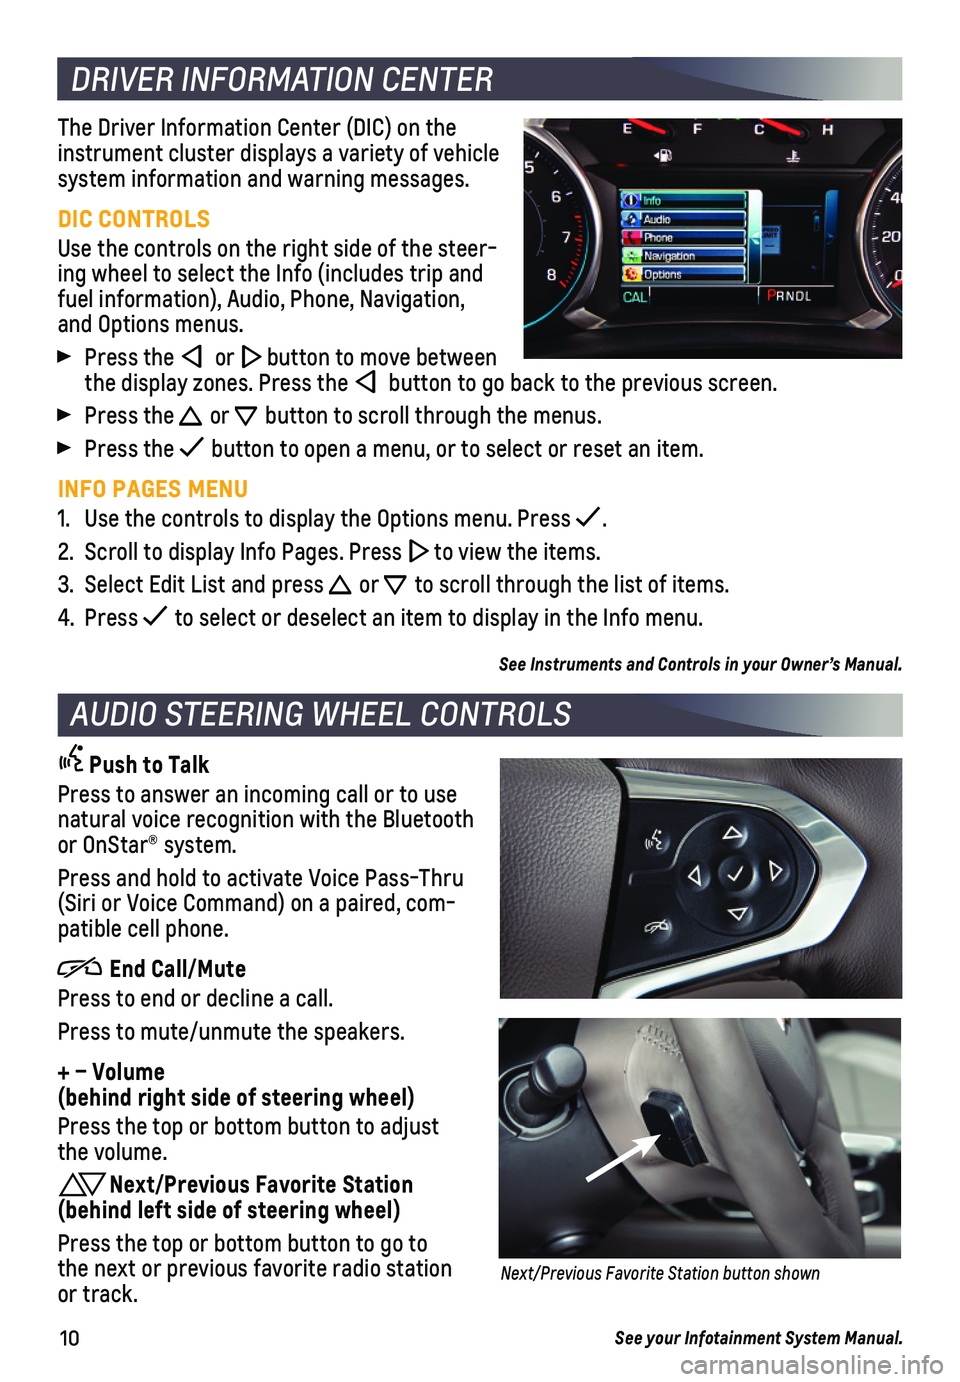 CHEVROLET TRAX 2019  Owners Manual 10
DRIVER INFORMATION CENTER
The Driver Information Center (DIC) on the instrument cluster displays a variety of vehicle system information and warning messages.
DIC CONTROLS
Use the controls on the r